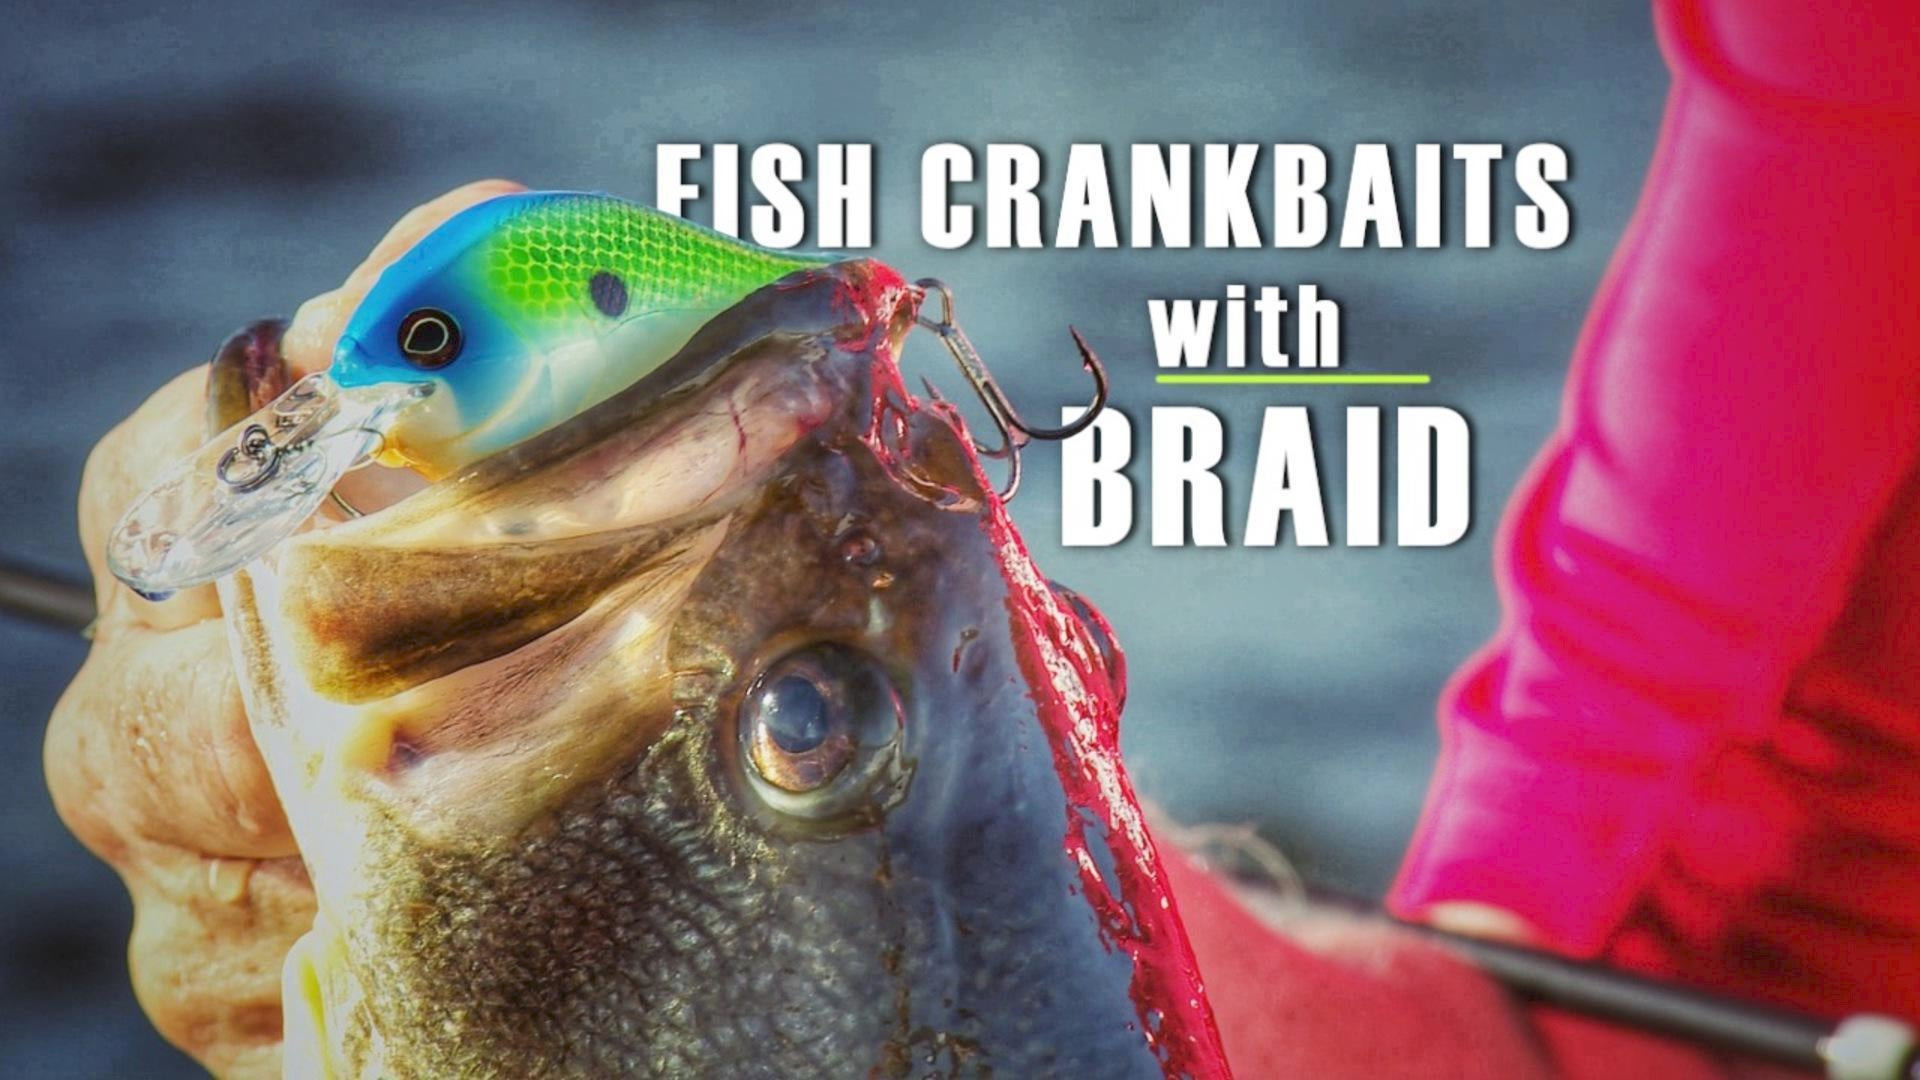 Why You Should Consider Braid for Cranking - Wired2Fish